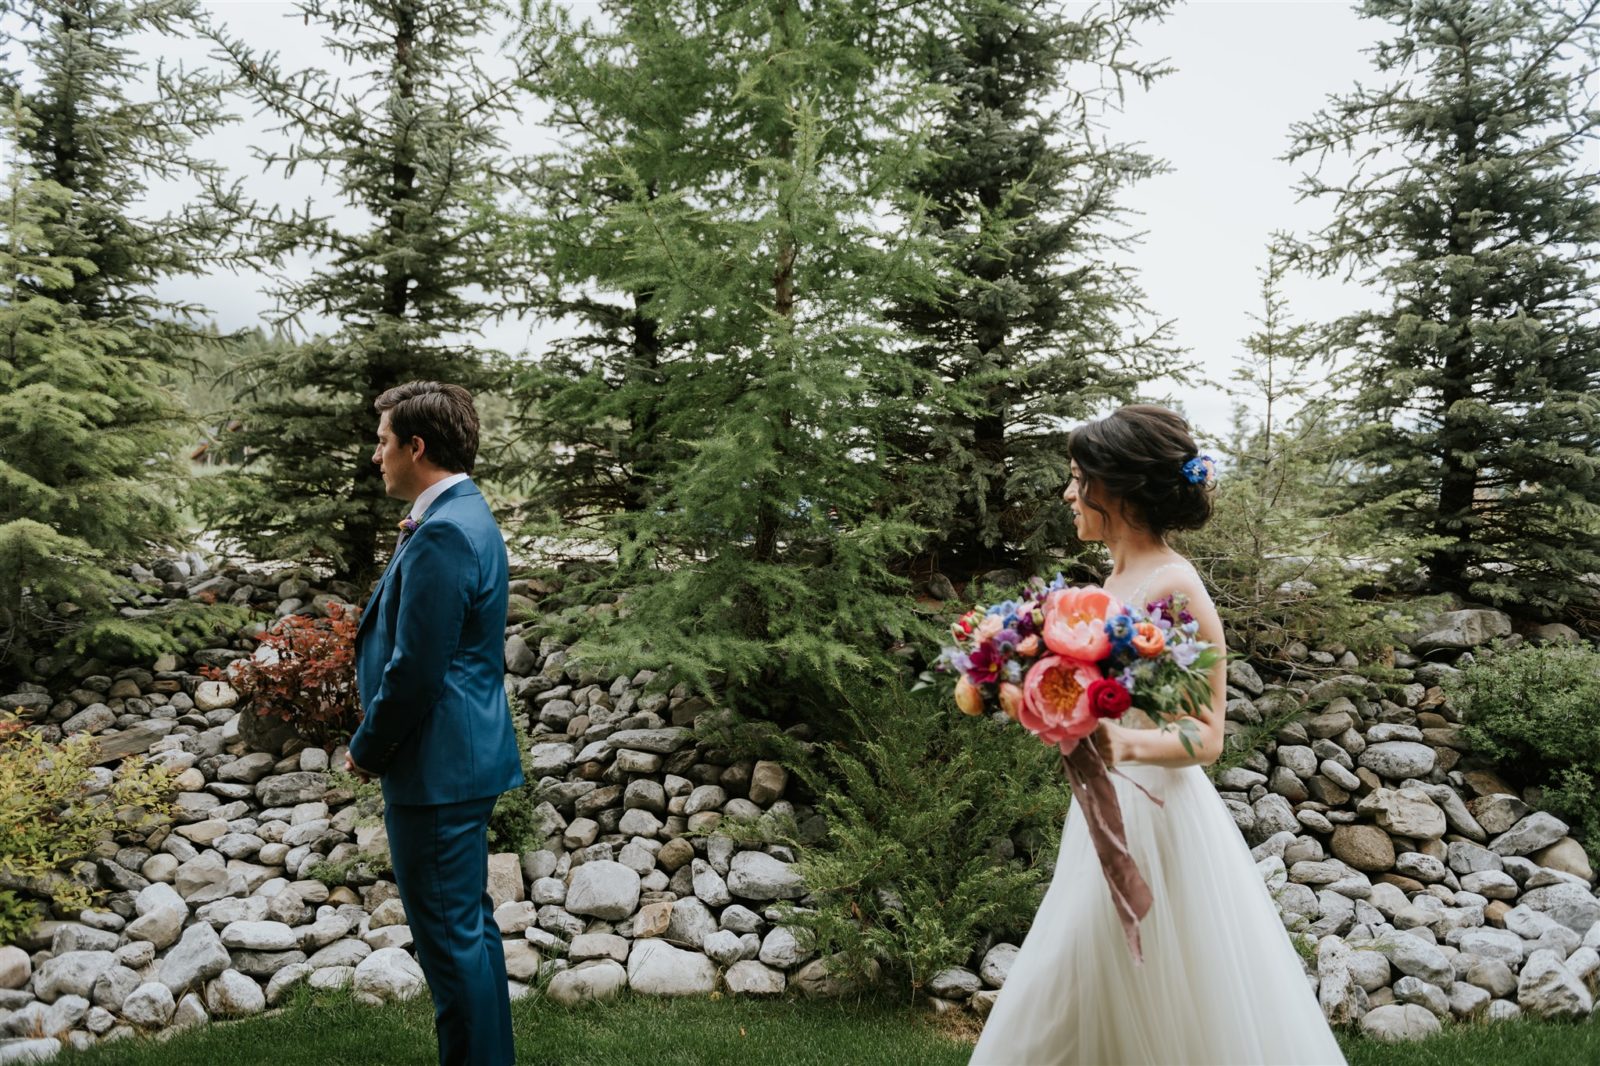 Intimate Mountaintop Wedding in Canmore With Colourful Wildflowers - featured on the Bronte Bride Blog